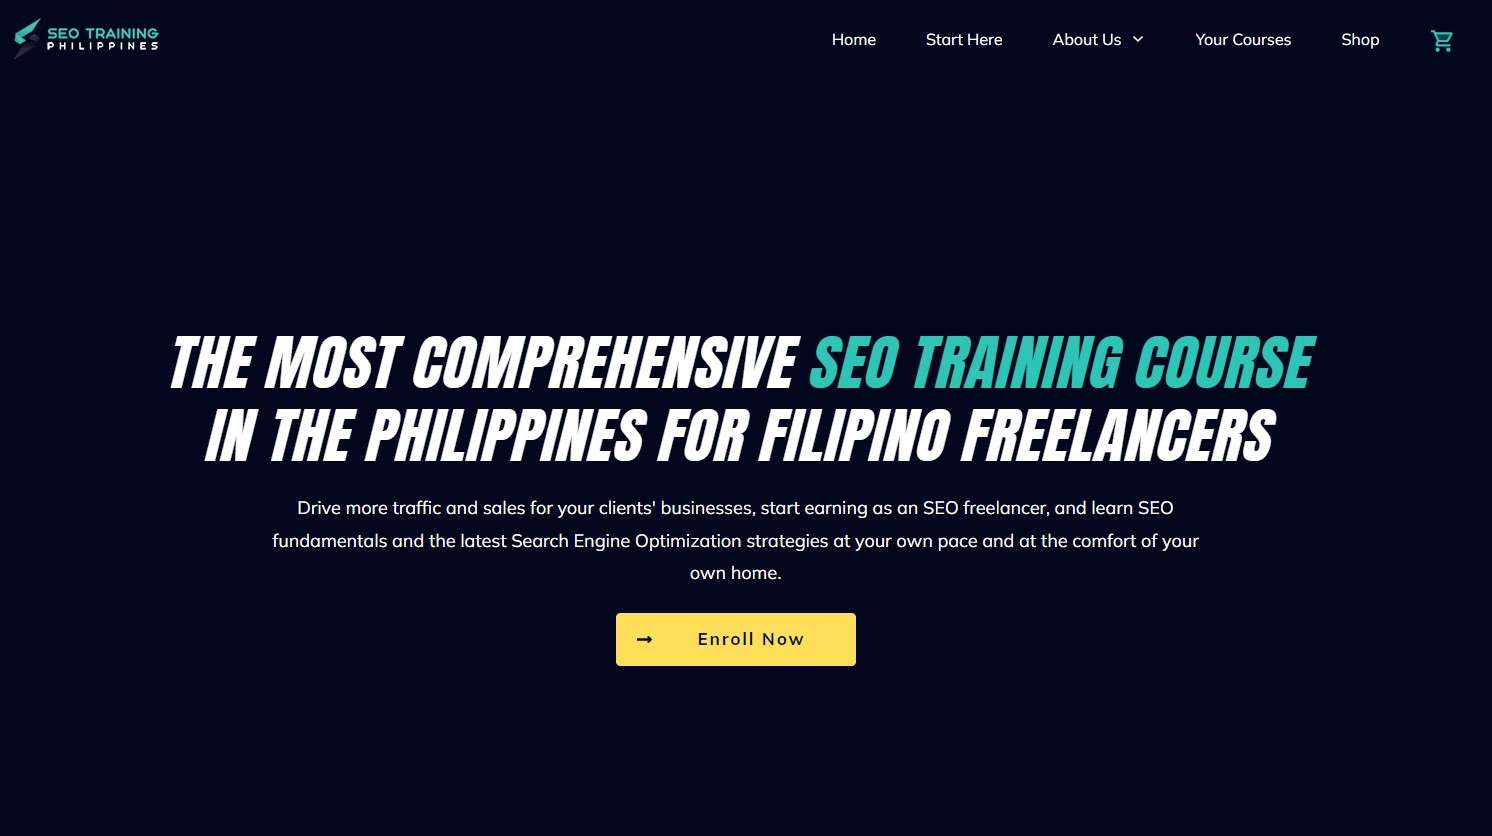 seo training course in the philippines